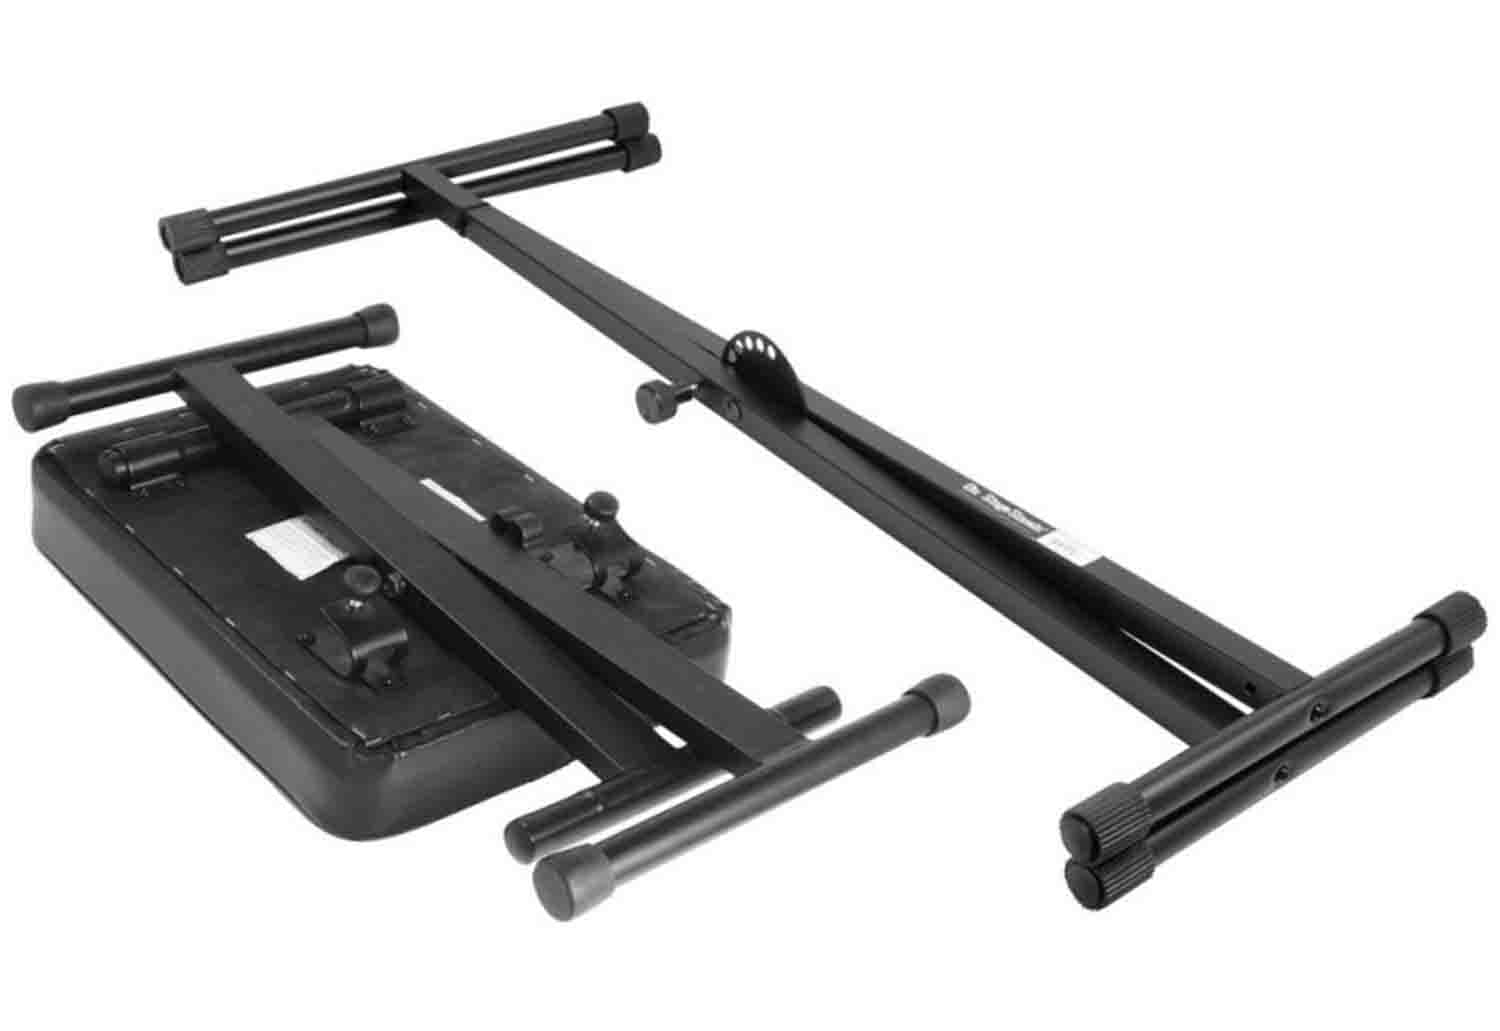 OnStage KPK6500 Keyboard Stand and Bench Pack - Black - Hollywood DJ